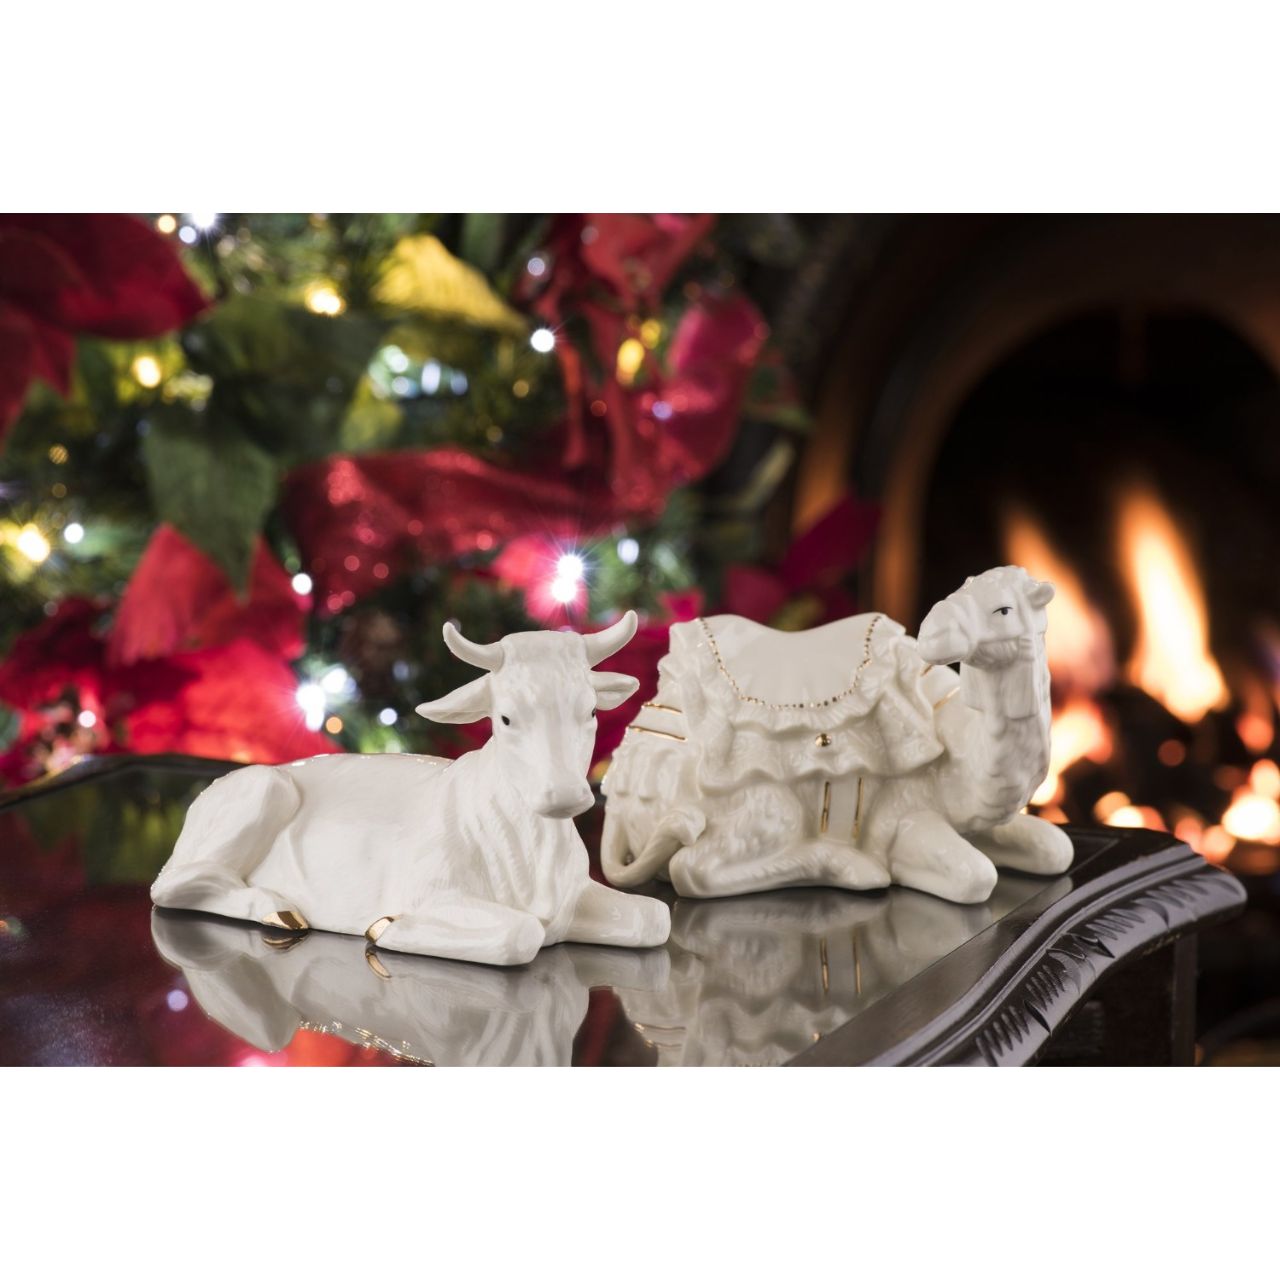 Belleek Living Manger Set - Ox and Camel  For that very special time of year when you want to show how much you care, Belleek Living have designed an exclusive Christmas Collection, full of unique gift ideas. Whether it is surprising that special someone or adding a contemporary touch to your home, the Christmas Collection holds the perfect solution.